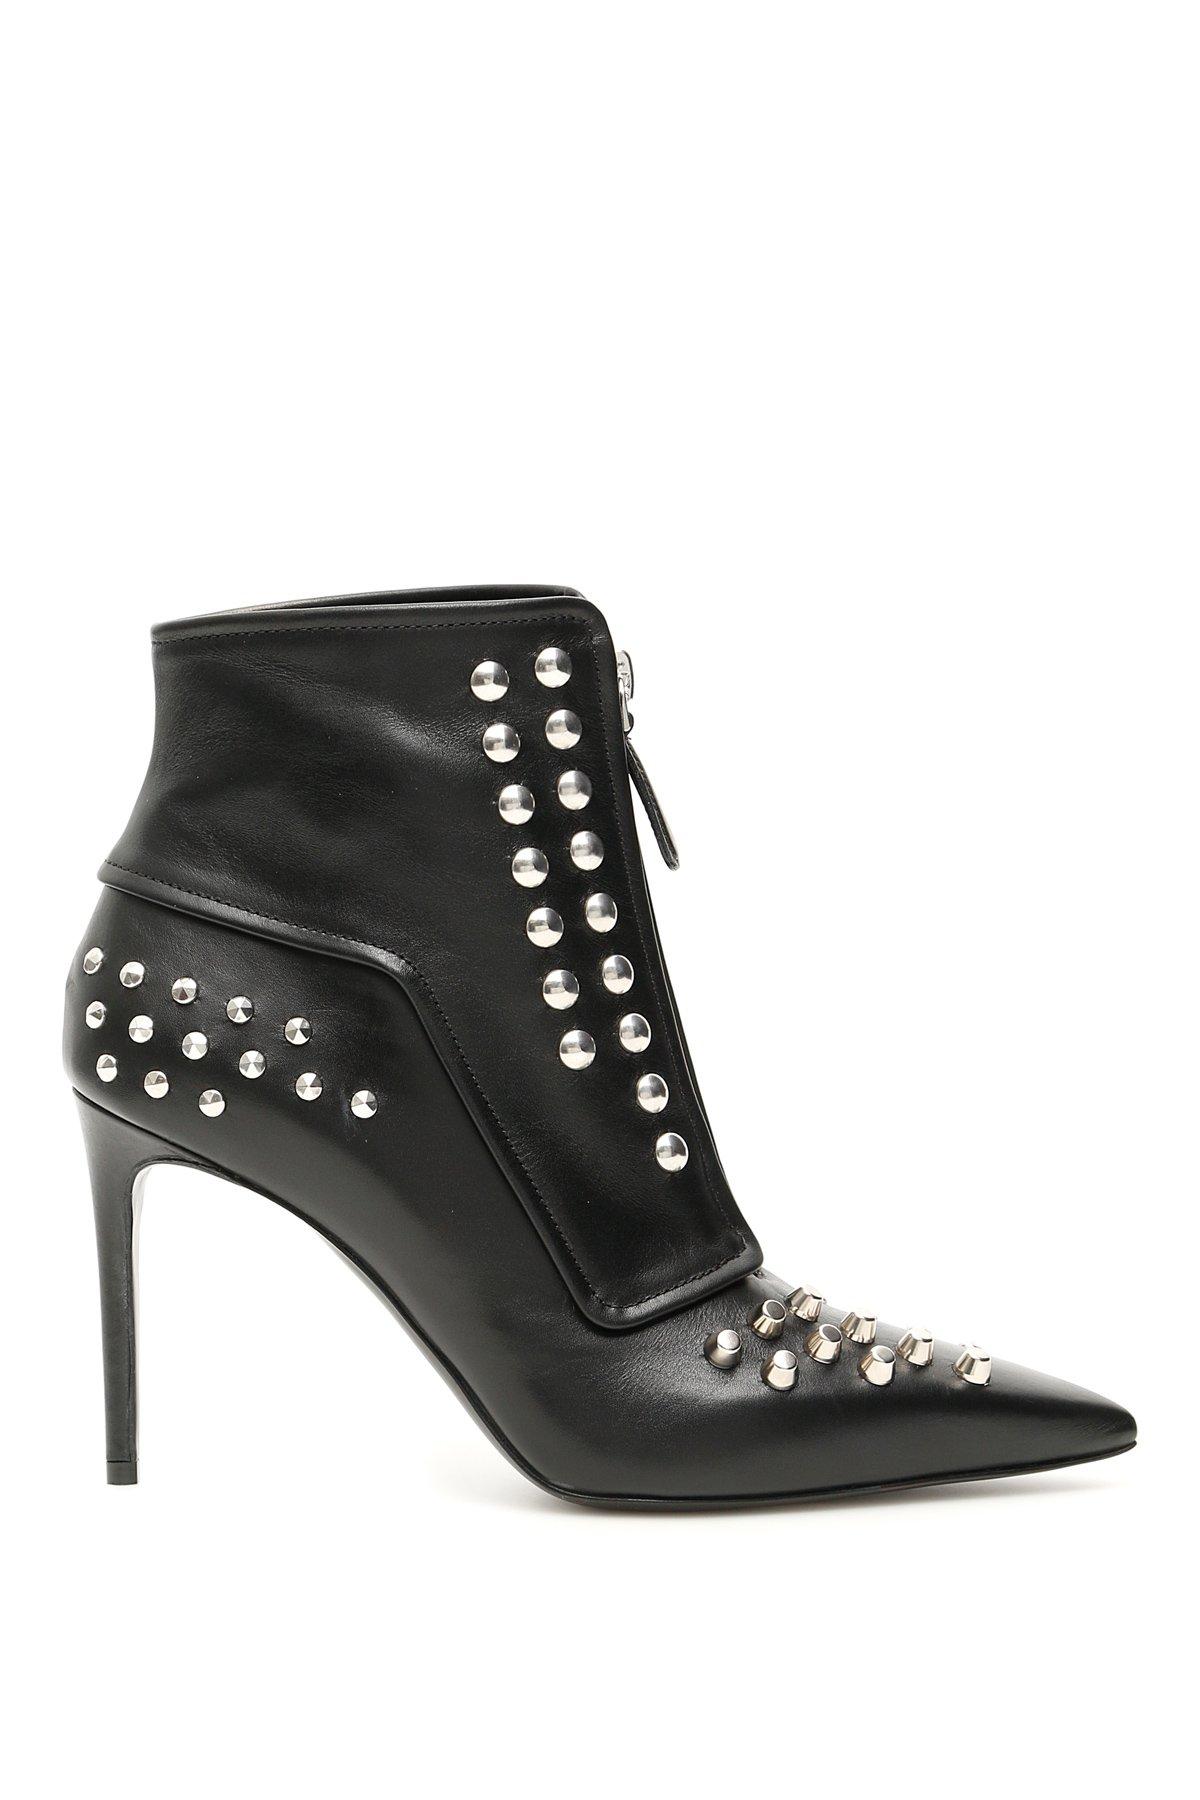 Alexander McQueen Leather Studded Ankle Boots in Black - Lyst